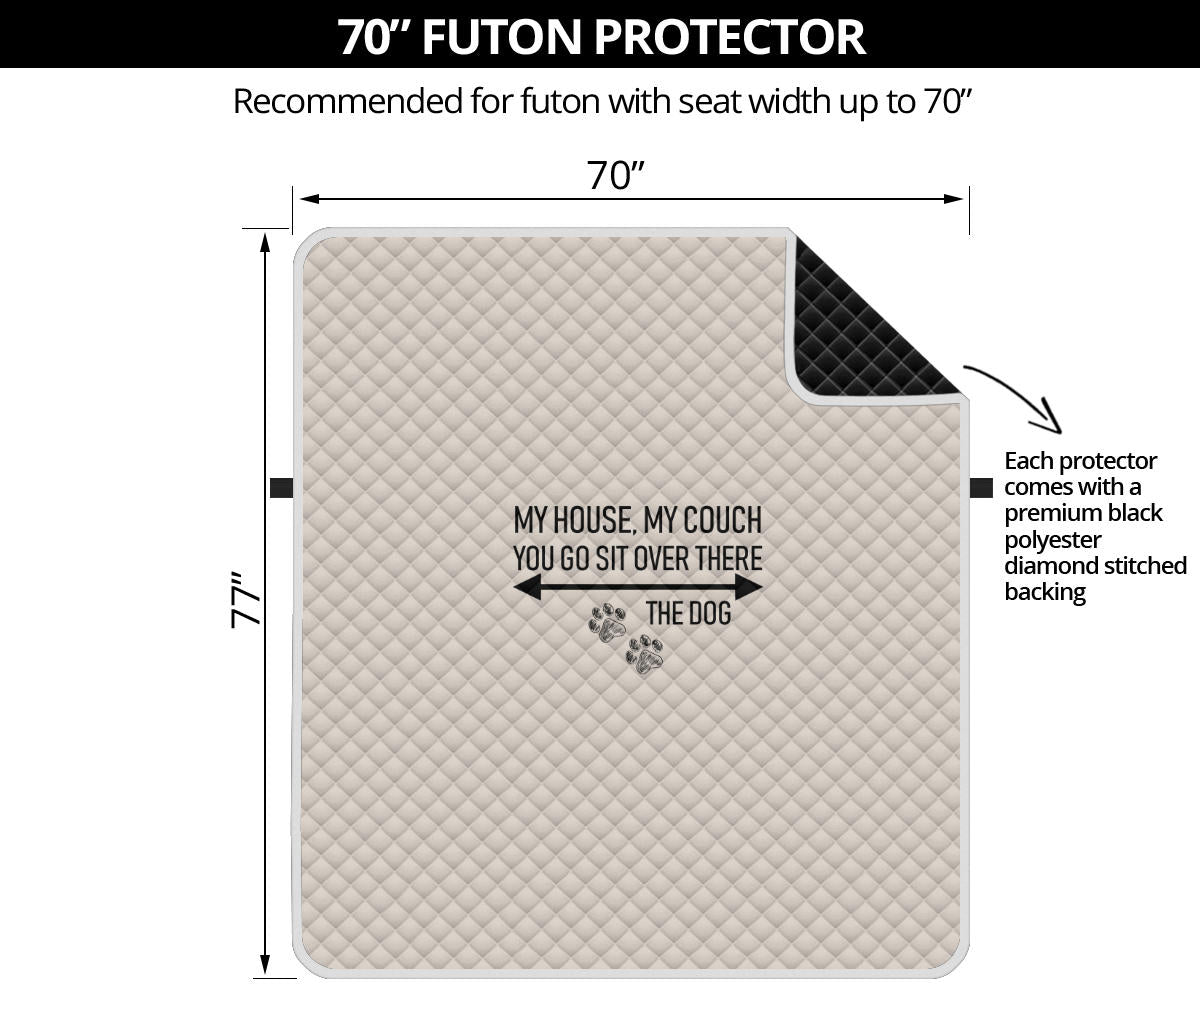 Furniture Protector - Futon - My House, My Couch